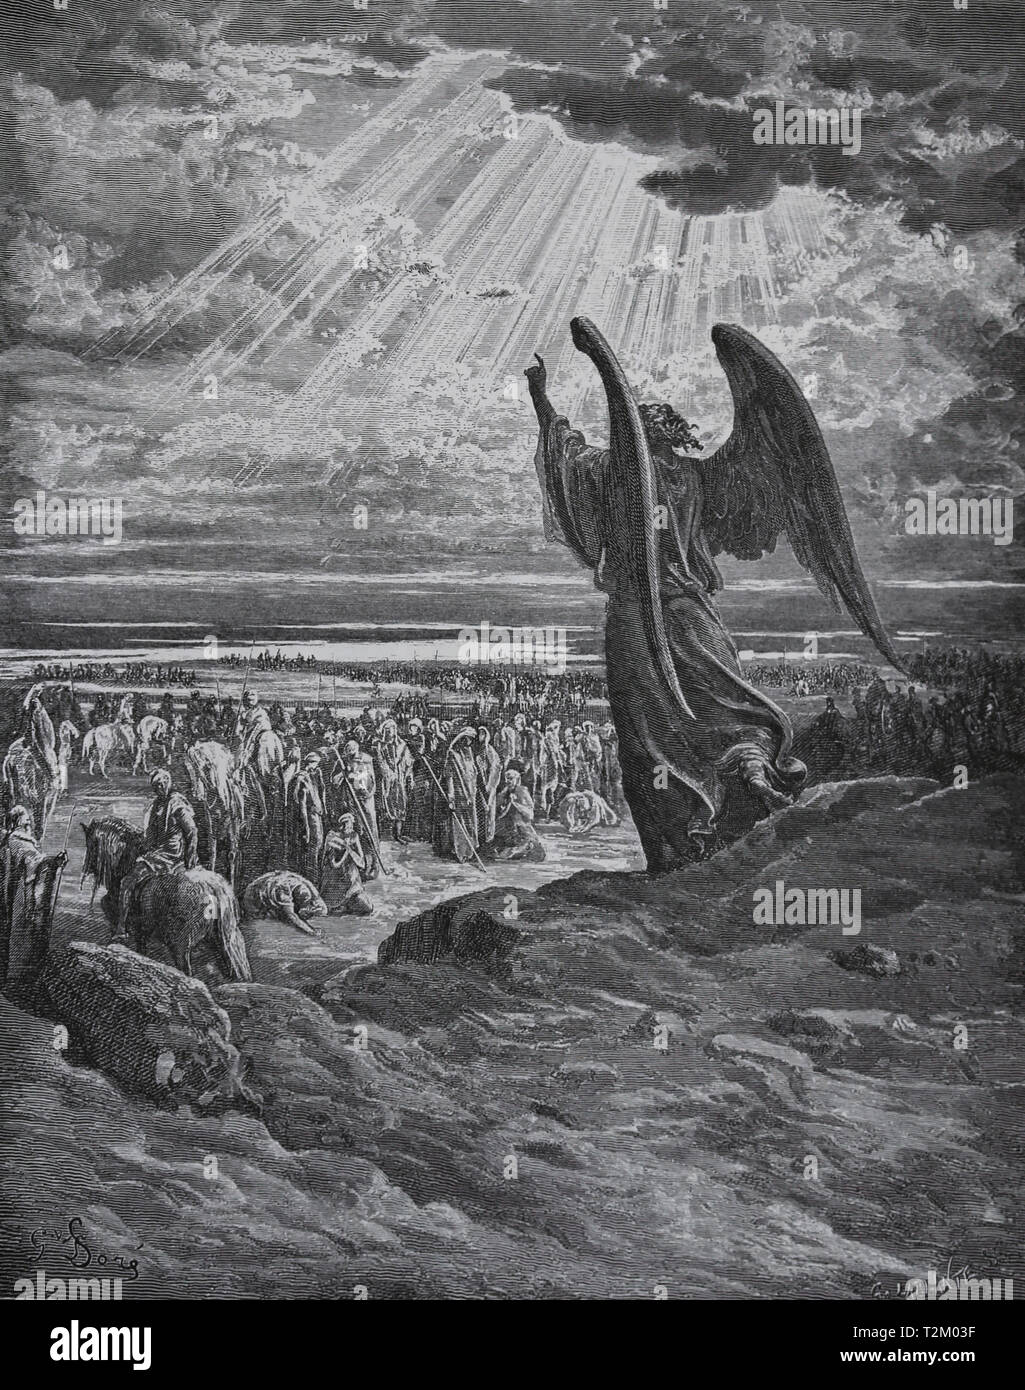 An angel appears to the Israelites. Conquest of Cannan. Bible, Book of Joshua. Engraving by Gustave Dore, 1866 Stock Photo